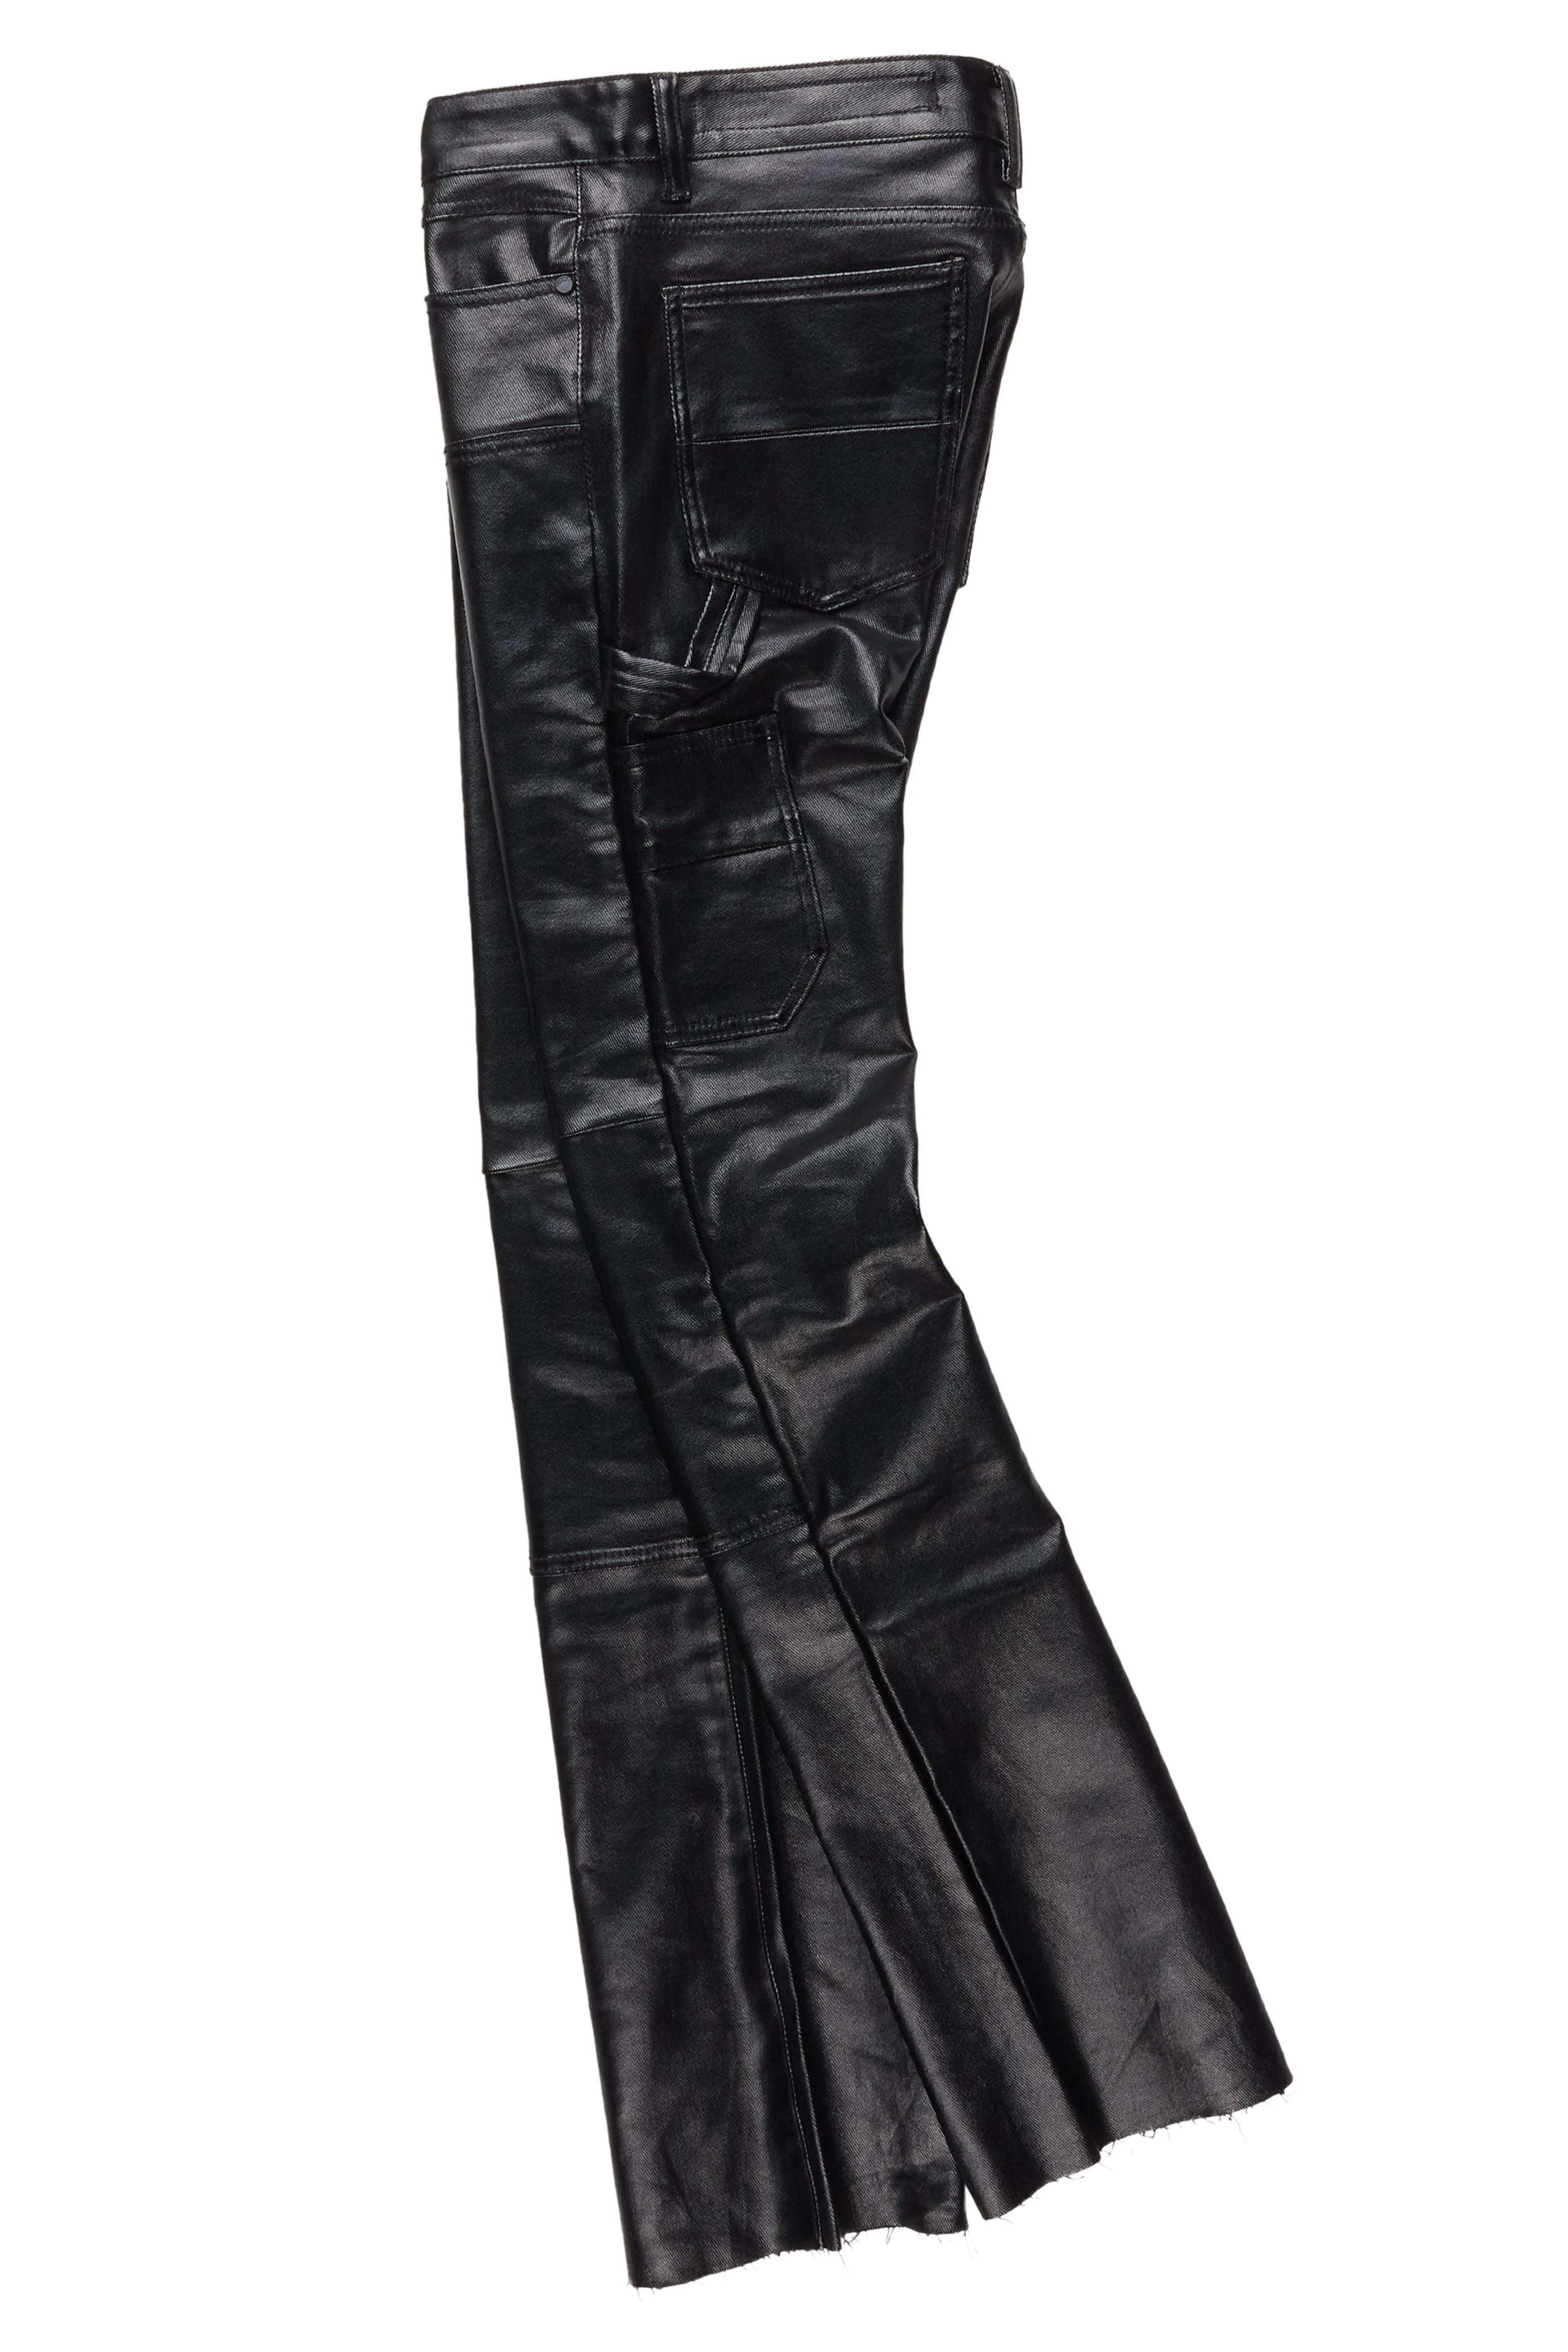 Alternate View 7 of Quartz Black Leather Stacked Flare Jean